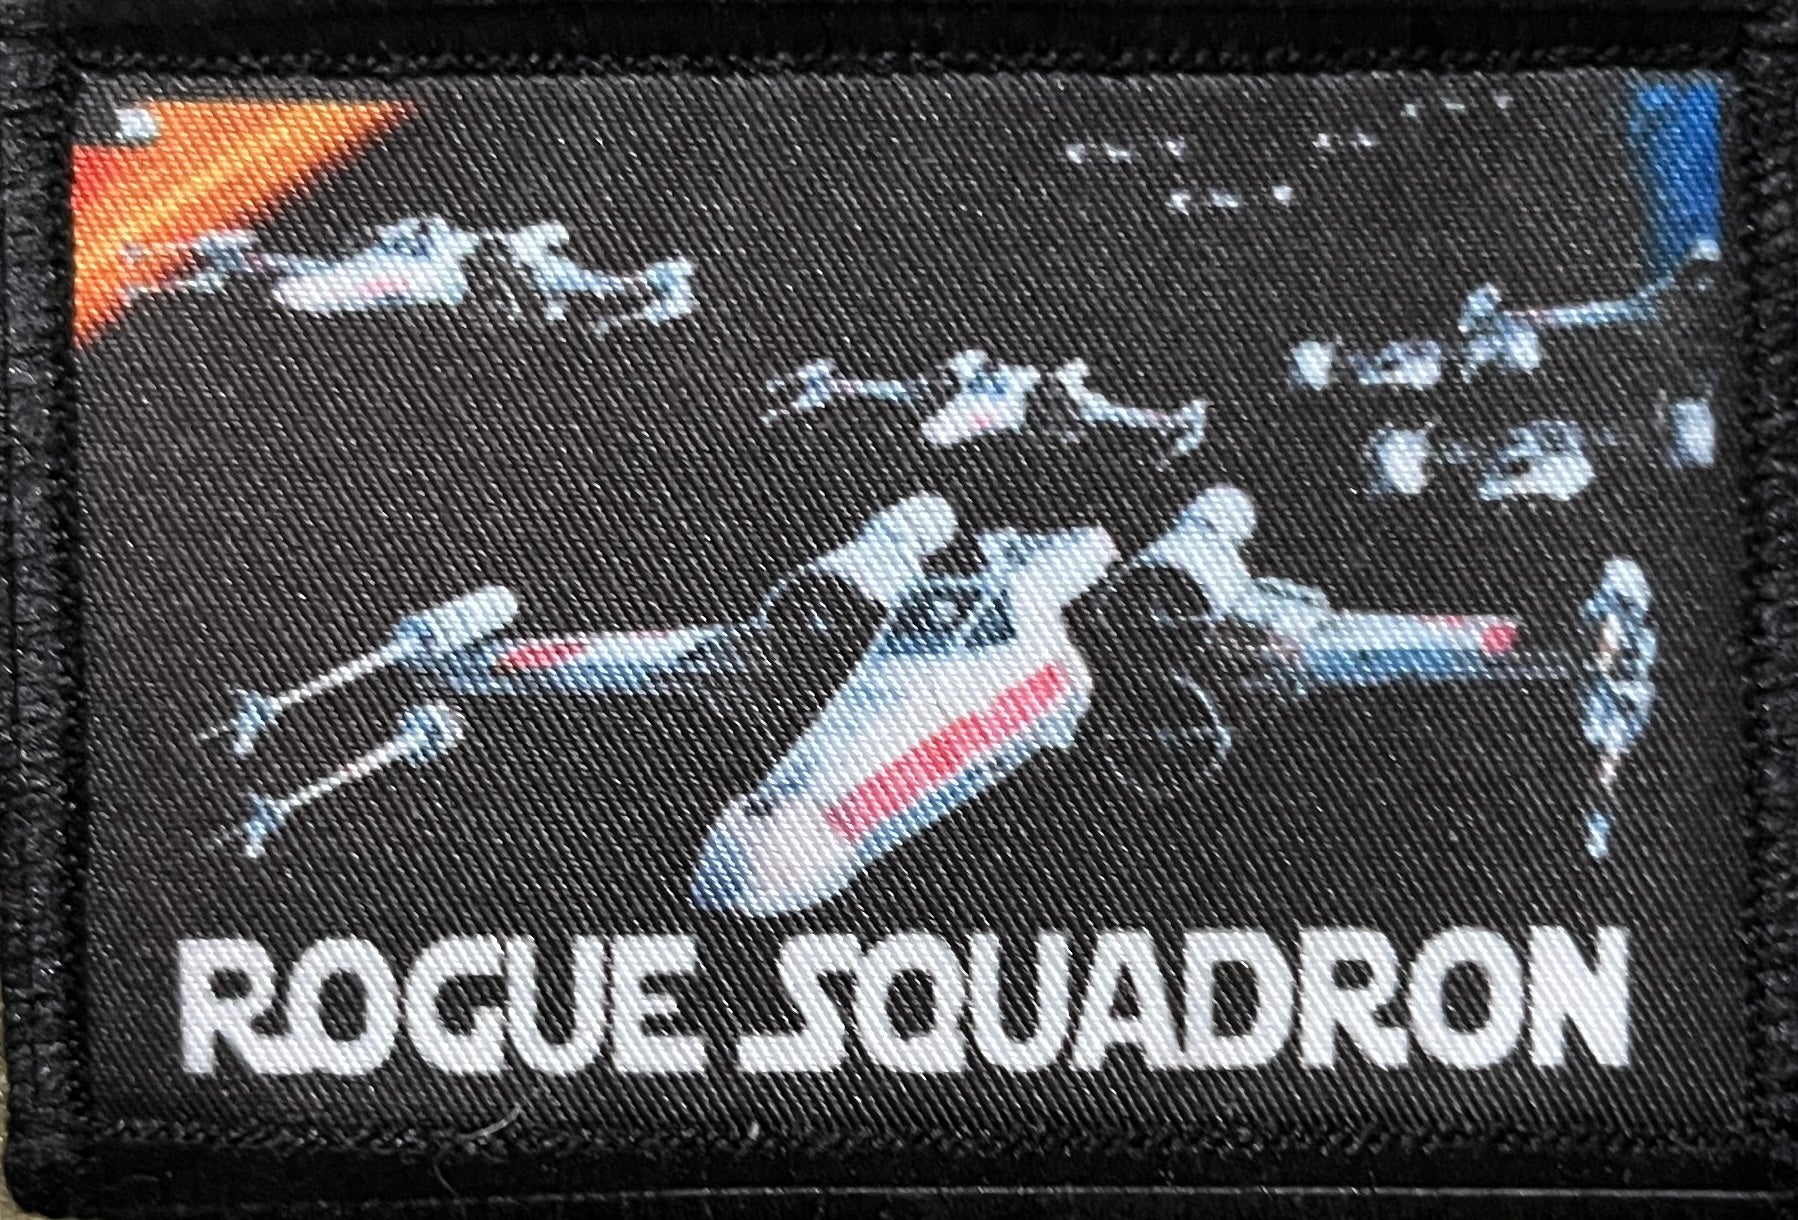 Star Wars Rogue Squadron Morale Patch Morale Patches Redheaded T Shirts 